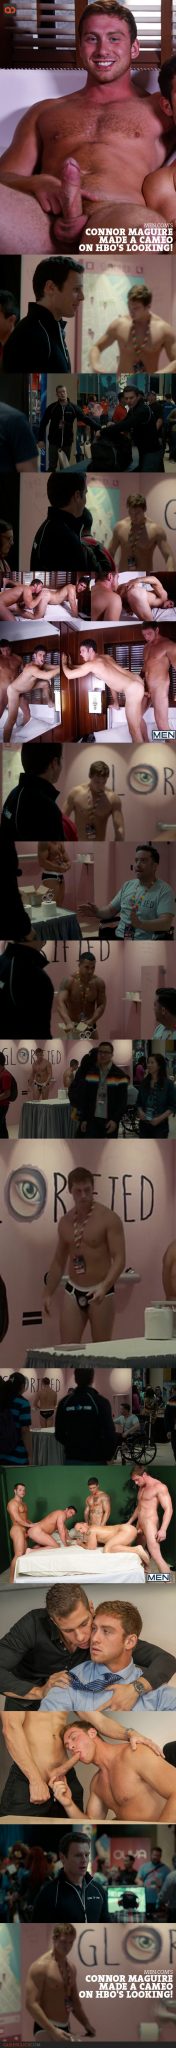 Connor Maguire (From Men.com) Made A Cameo on HBO's Looking!